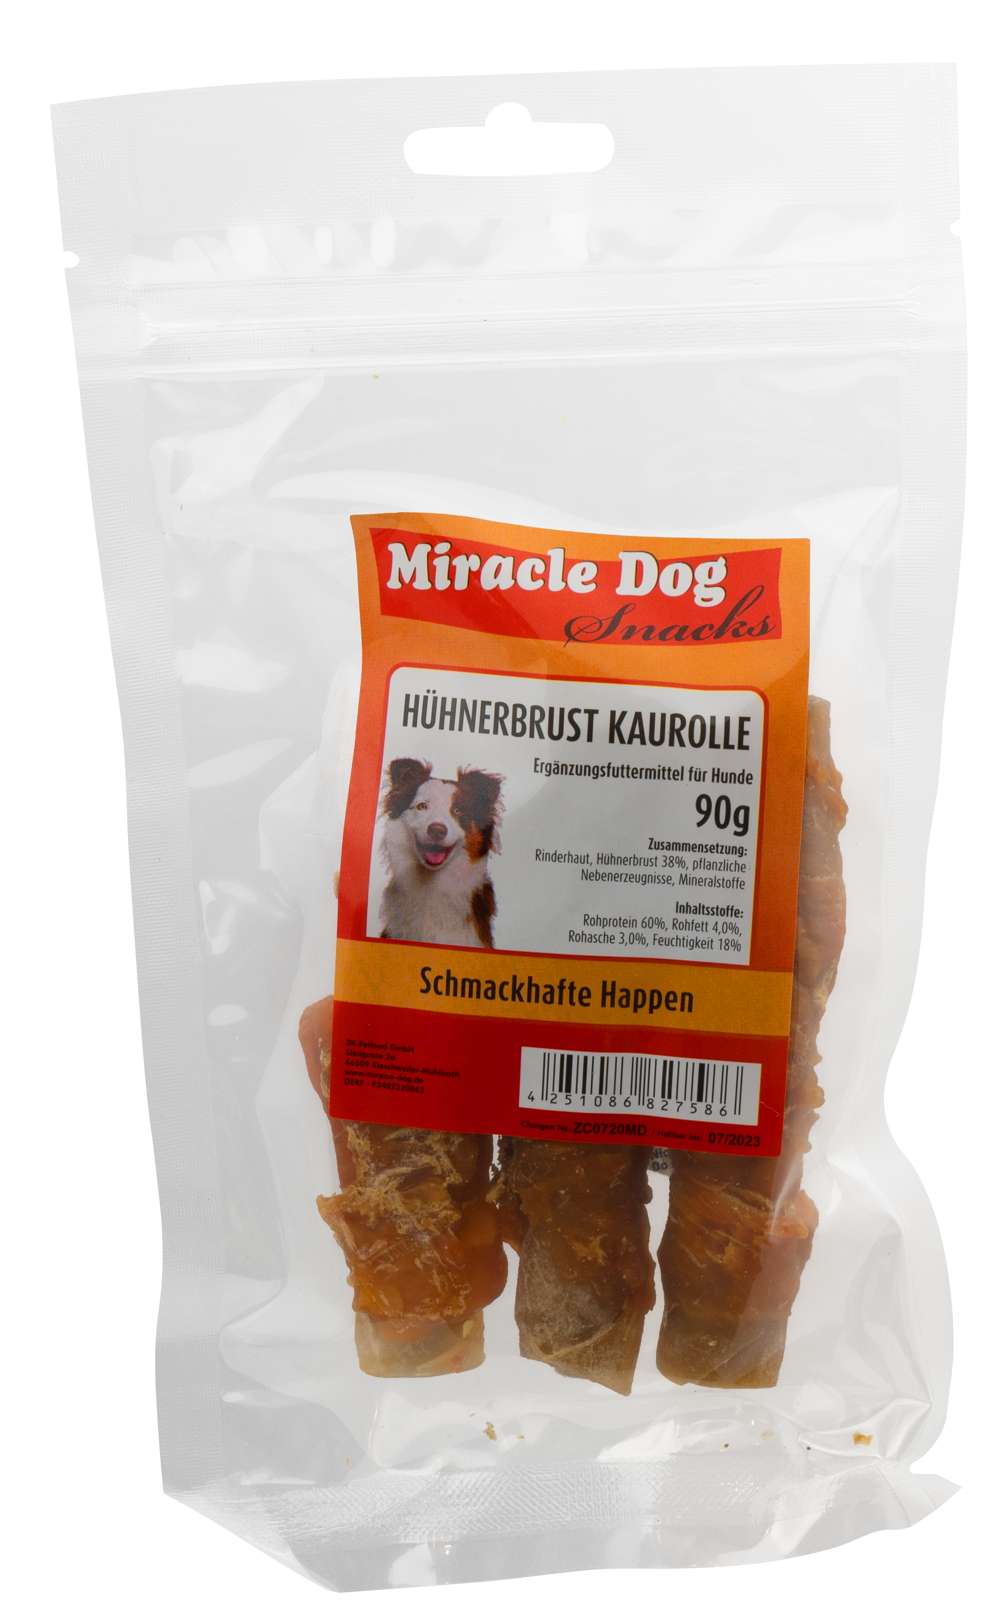 Miracle Dog Hühnerbrust Kaurolle